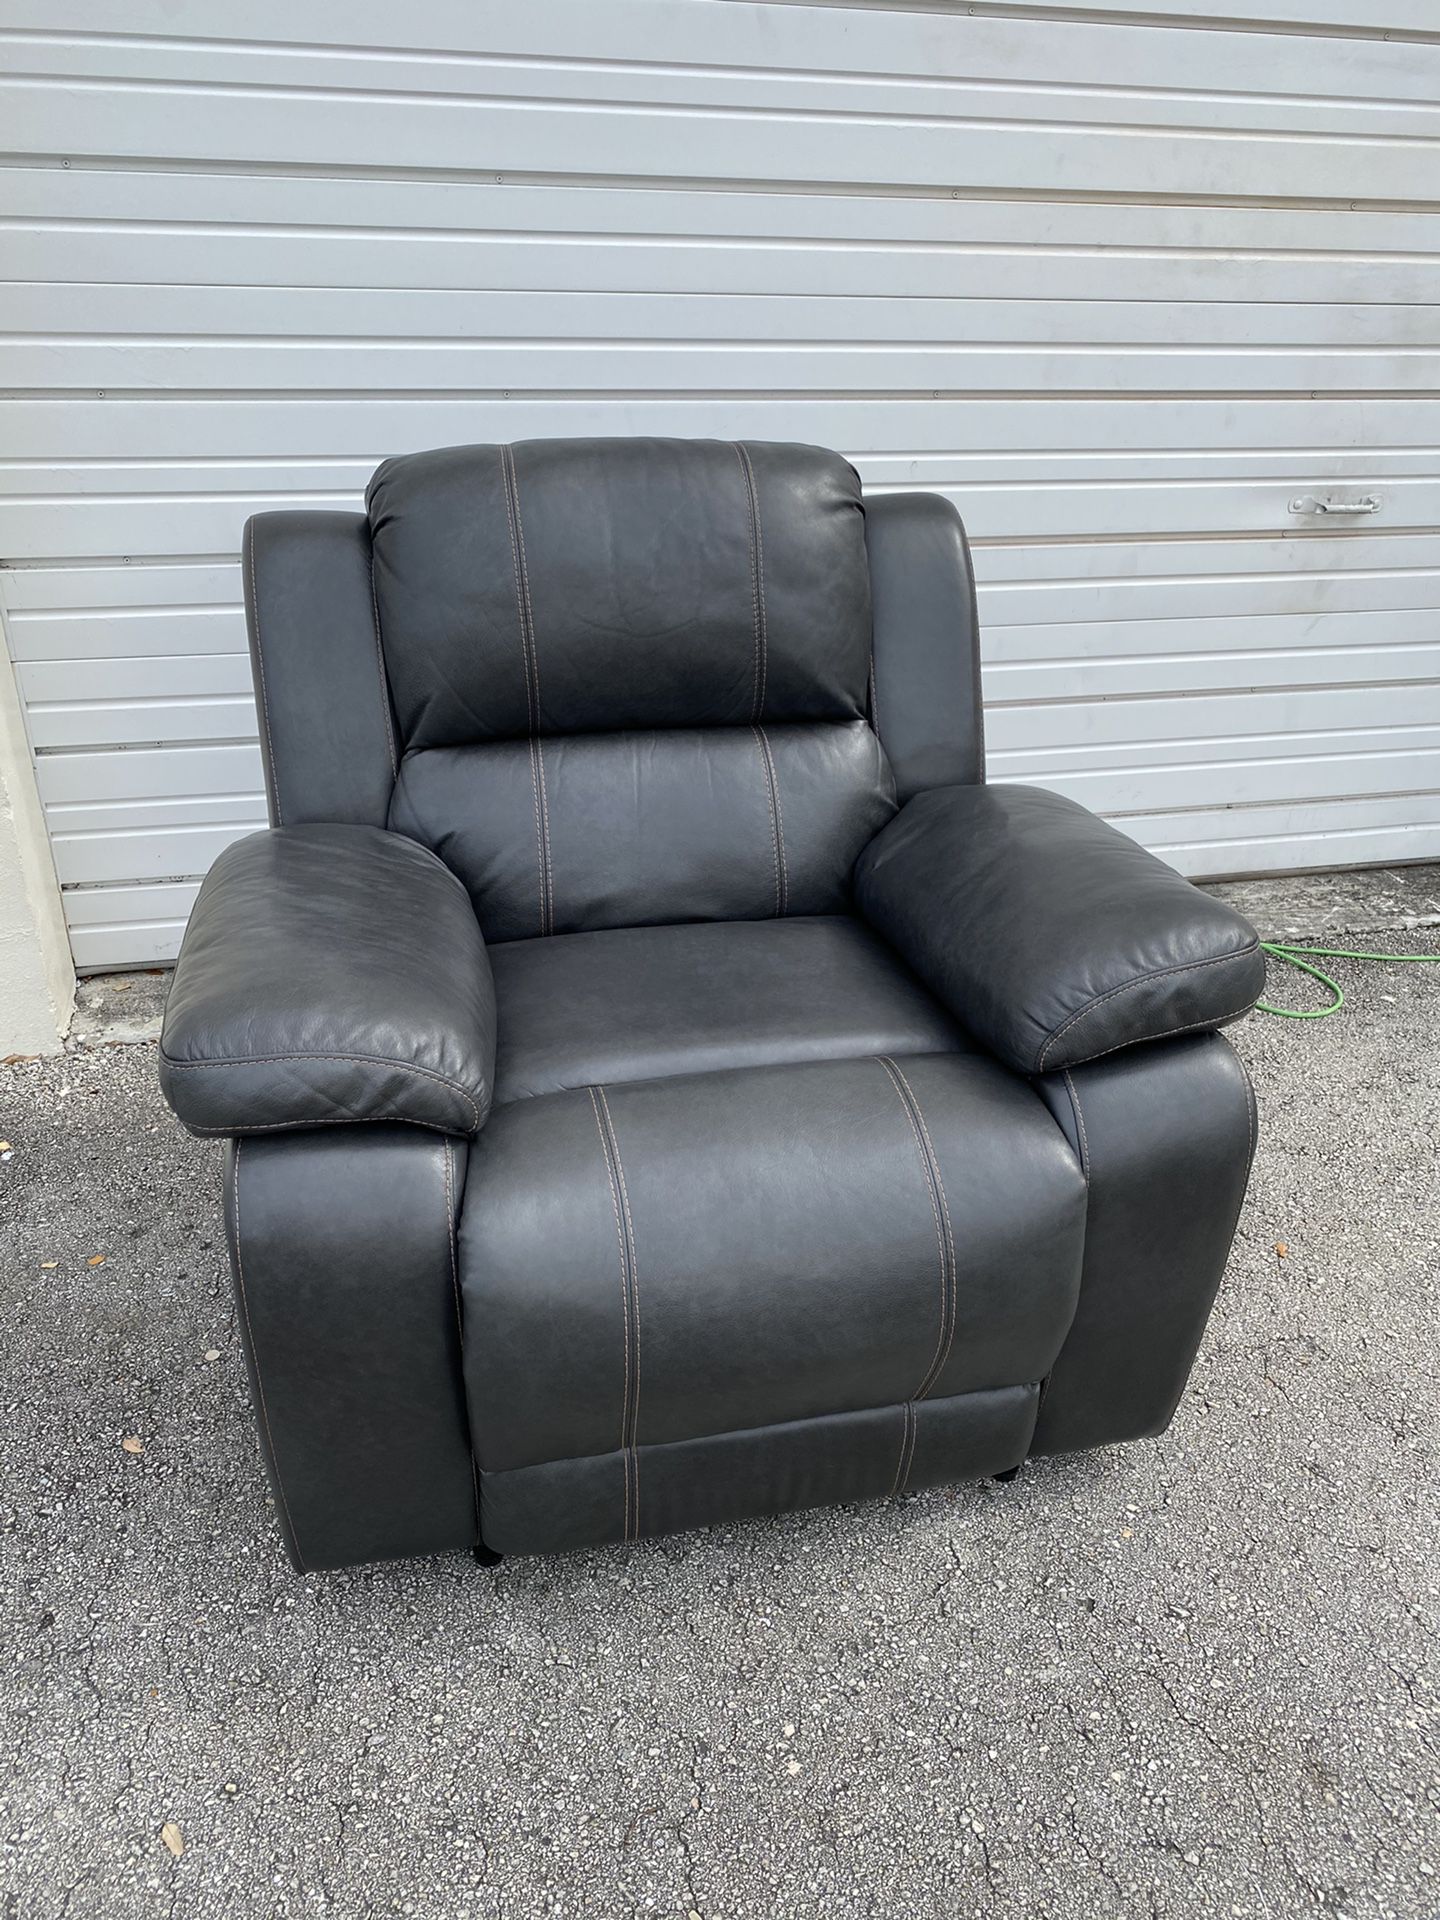 50% OFF // OPEN BOX LIKE NEW // COSTCO Dunhill Leather Power Recliner